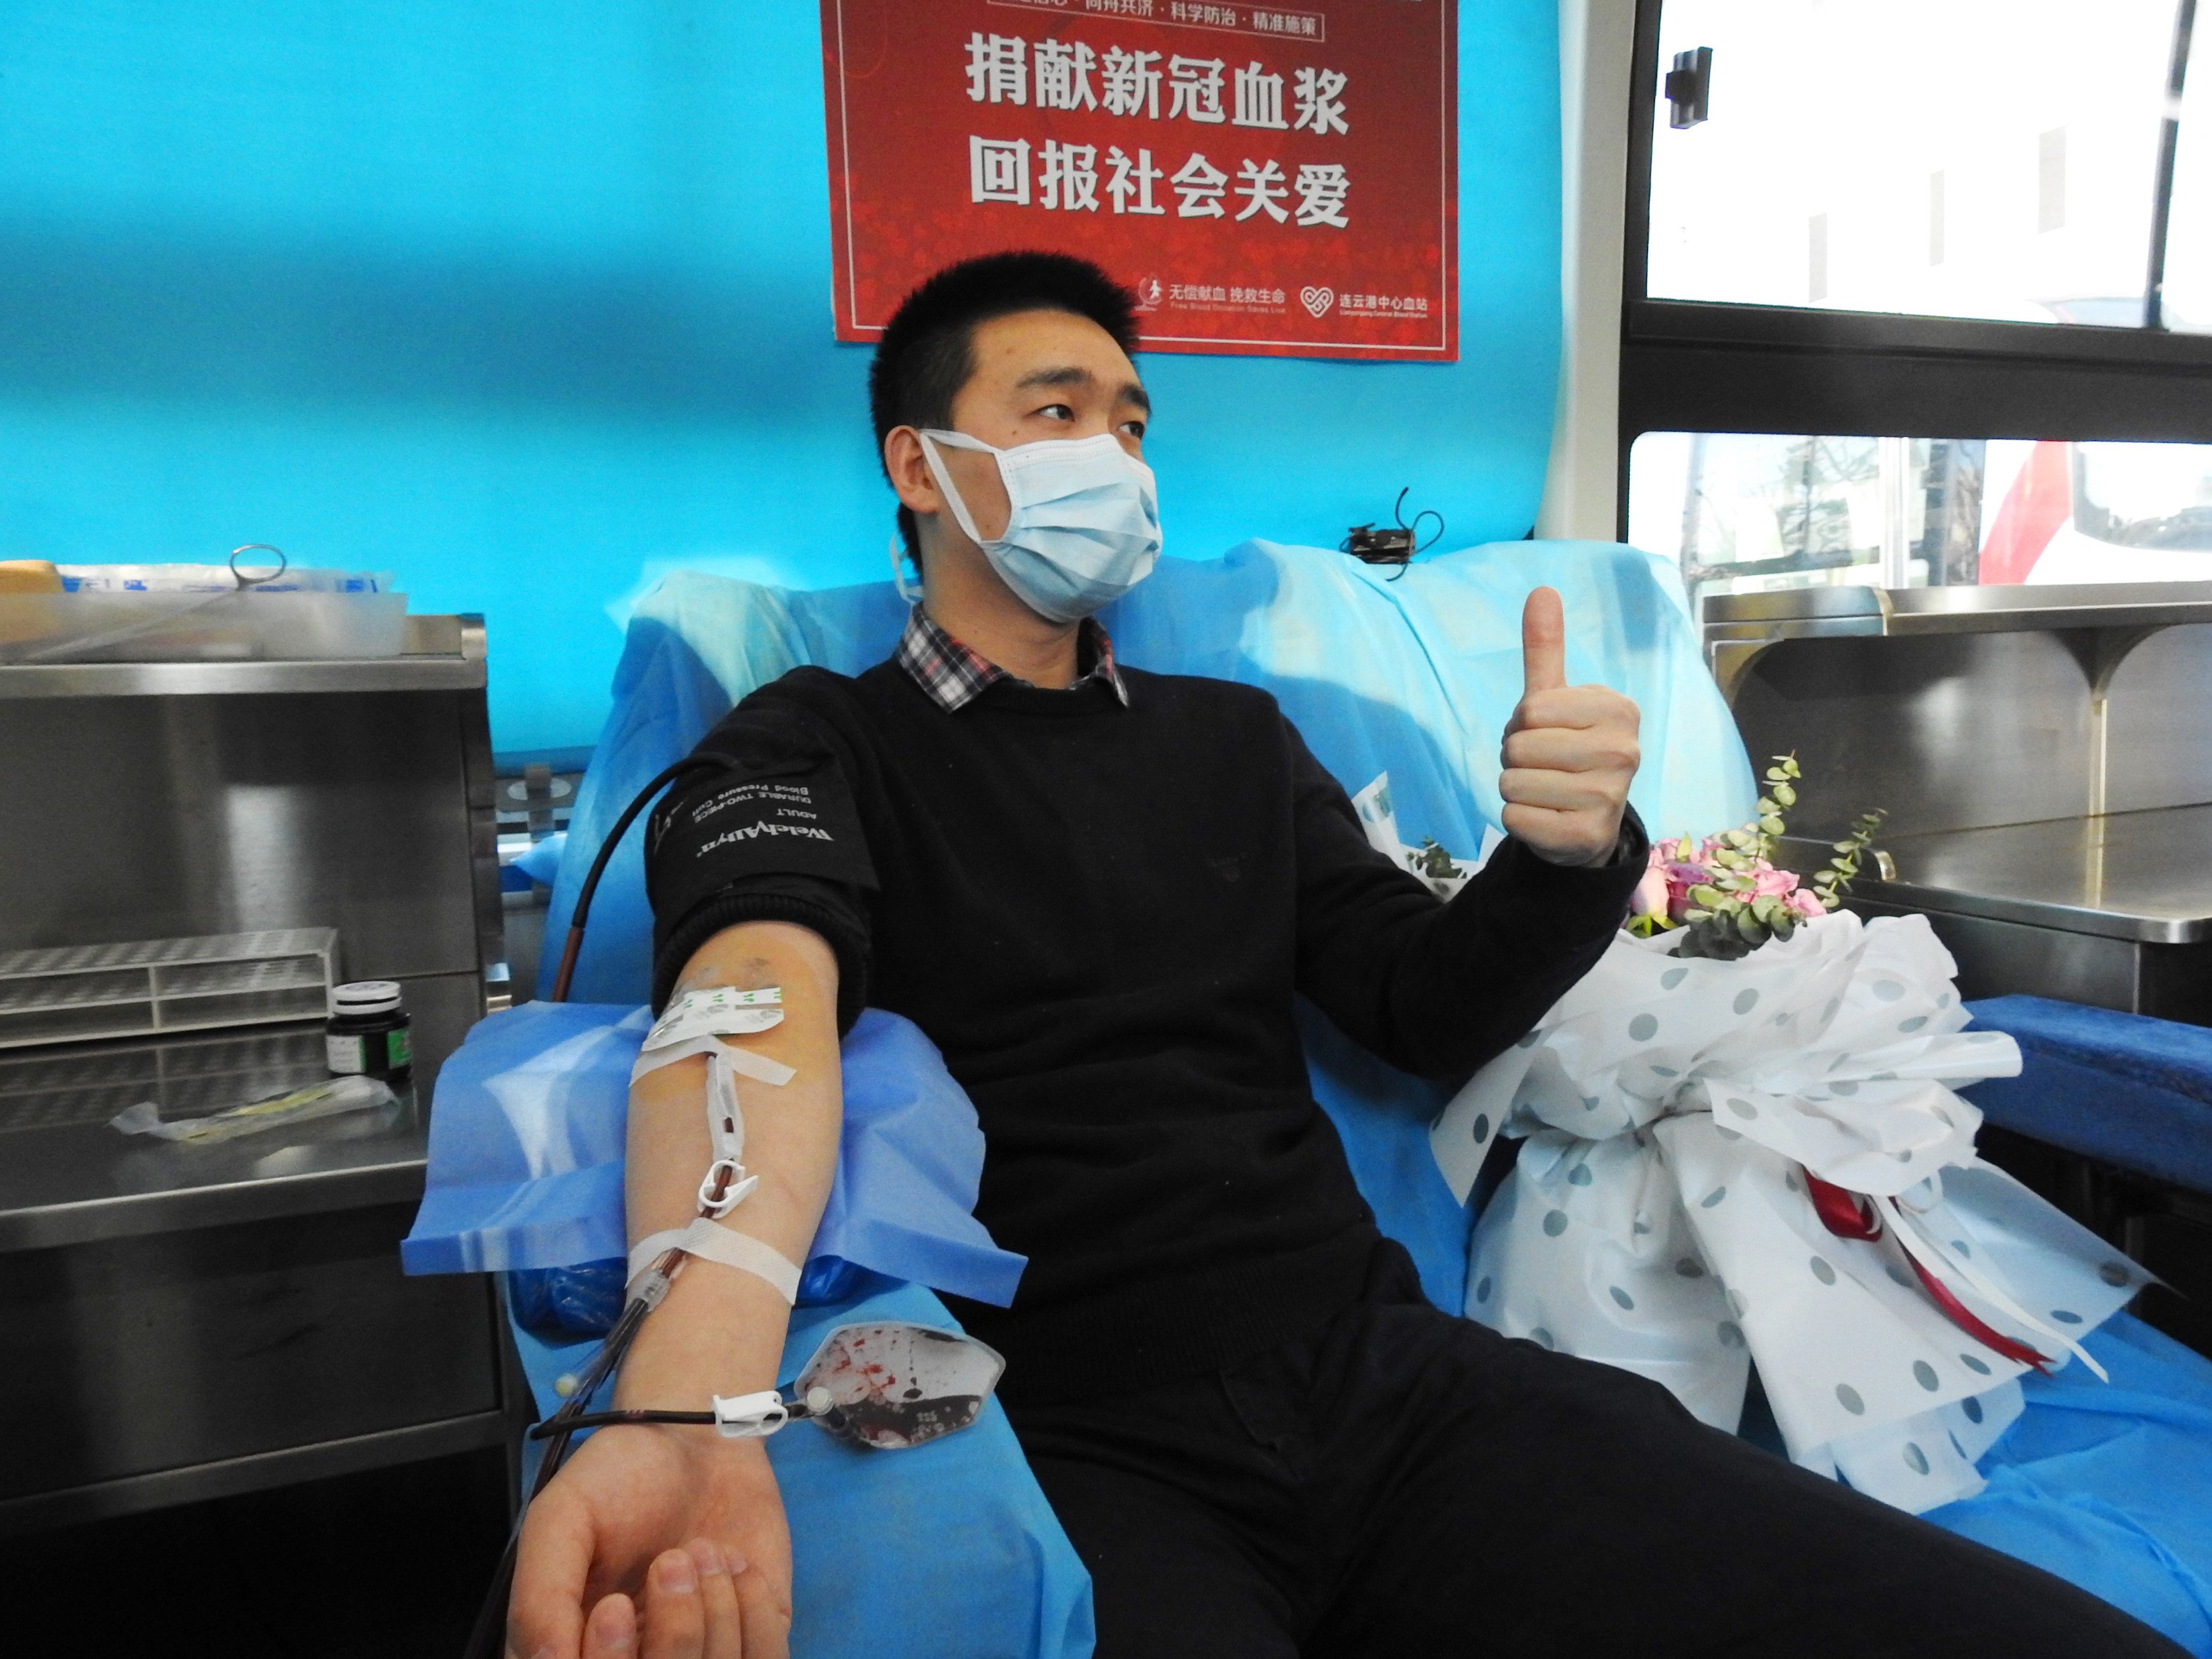 Authorities in parts of China have called for blood donors to come forward. Photo: Reuters